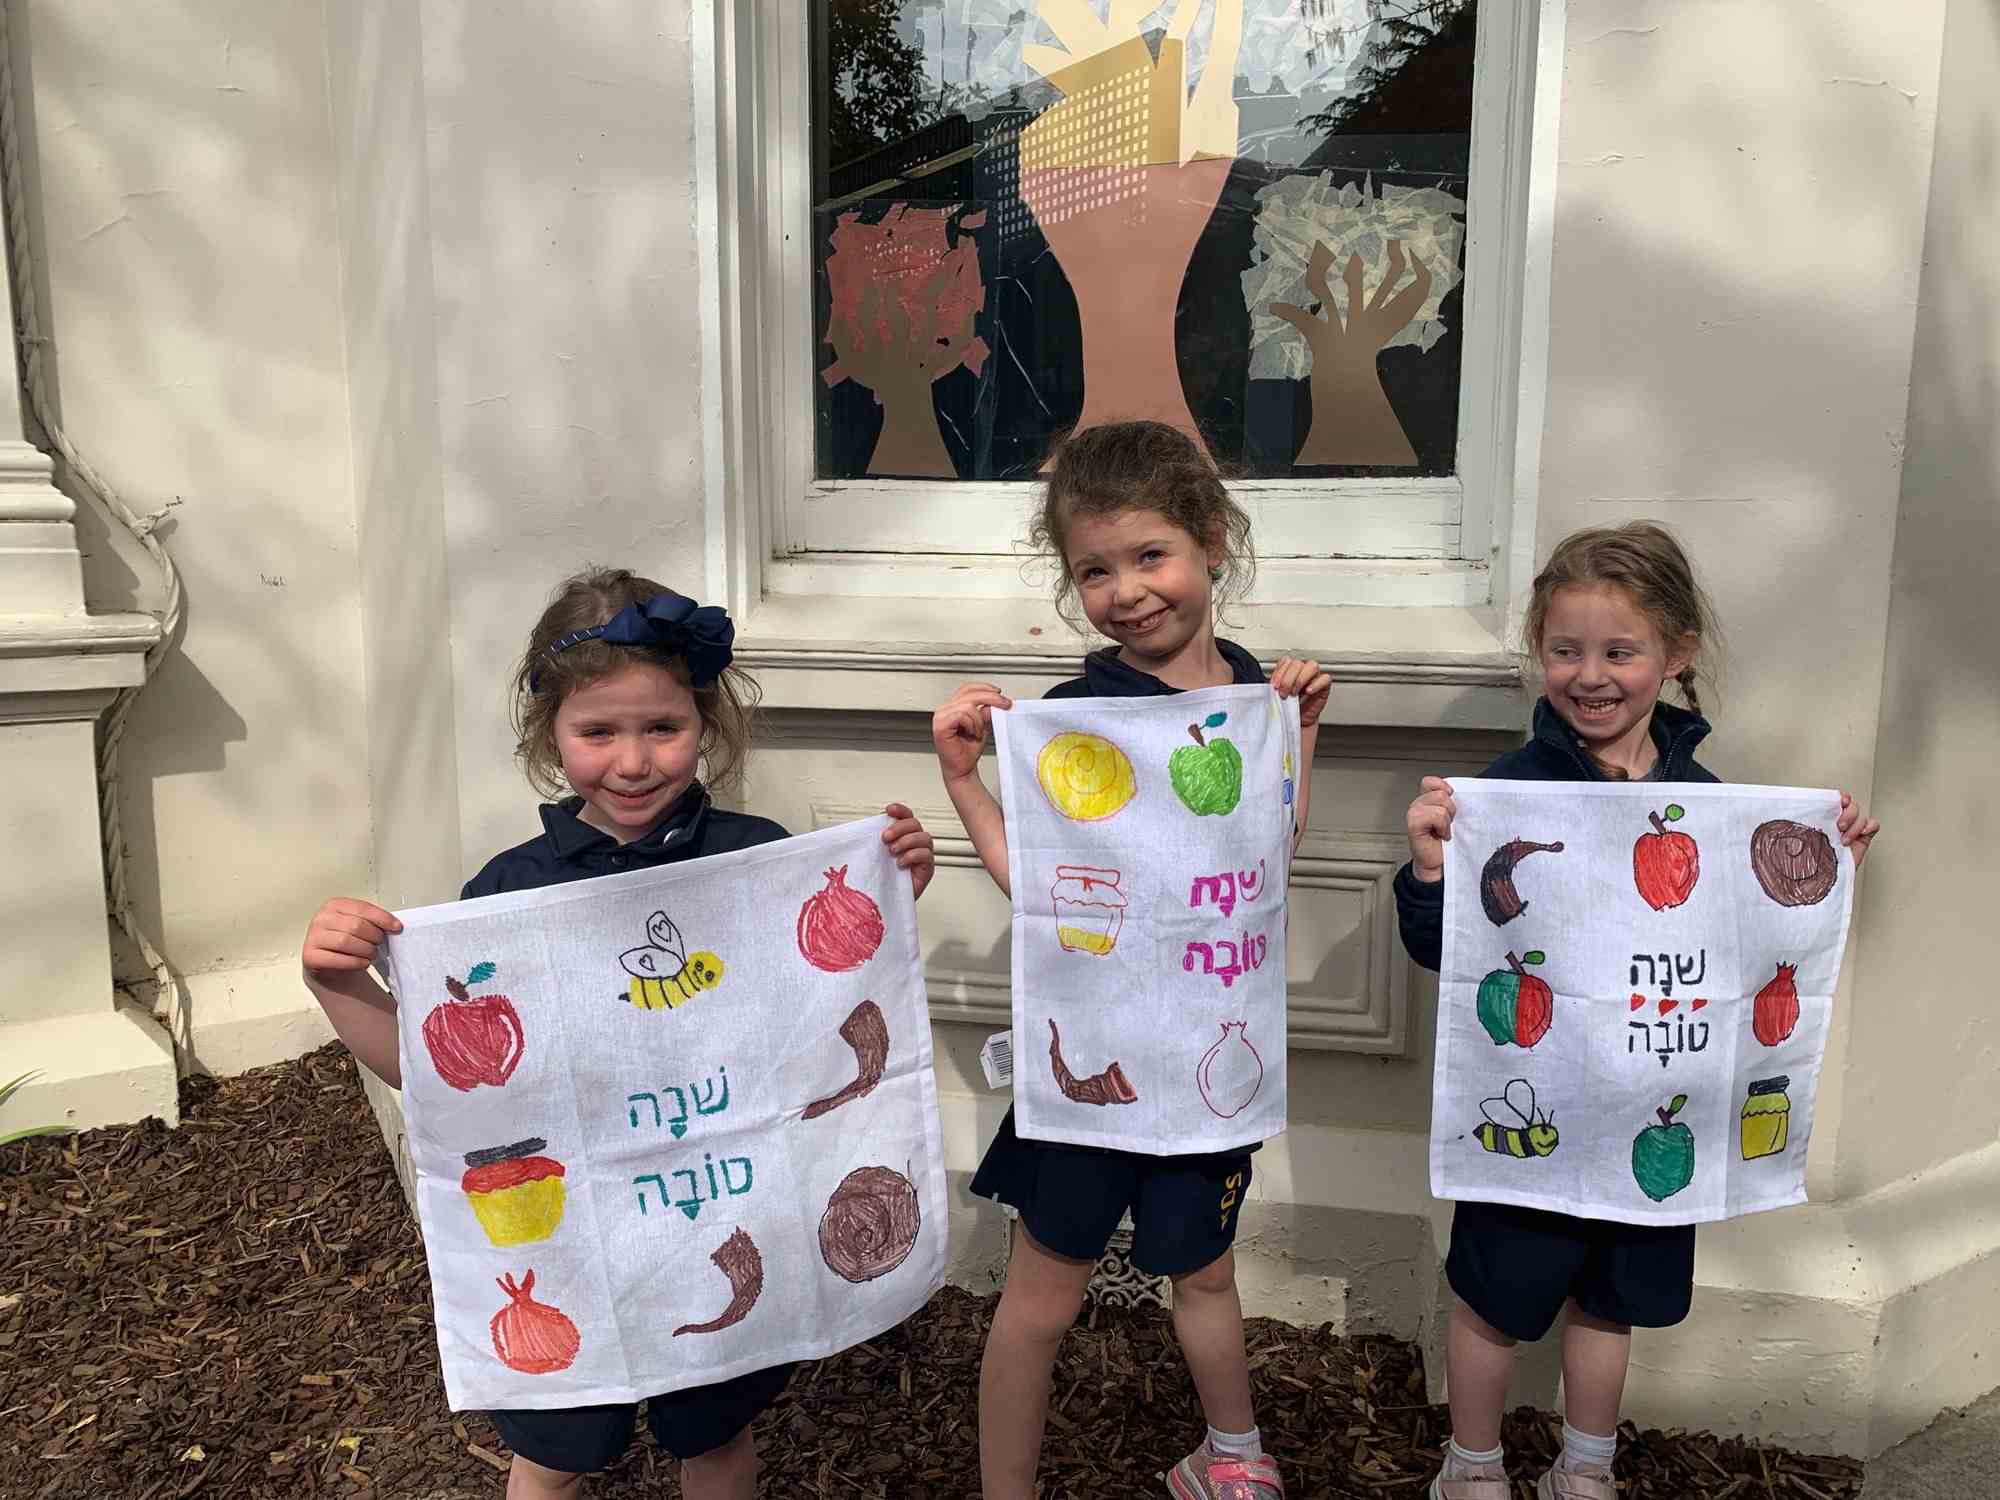 Junior School students are holding tea towels they have painted with Rosh HaShanah symbols and greetings - they say Shana Tova. The three students are smiling and squinting in the sun.